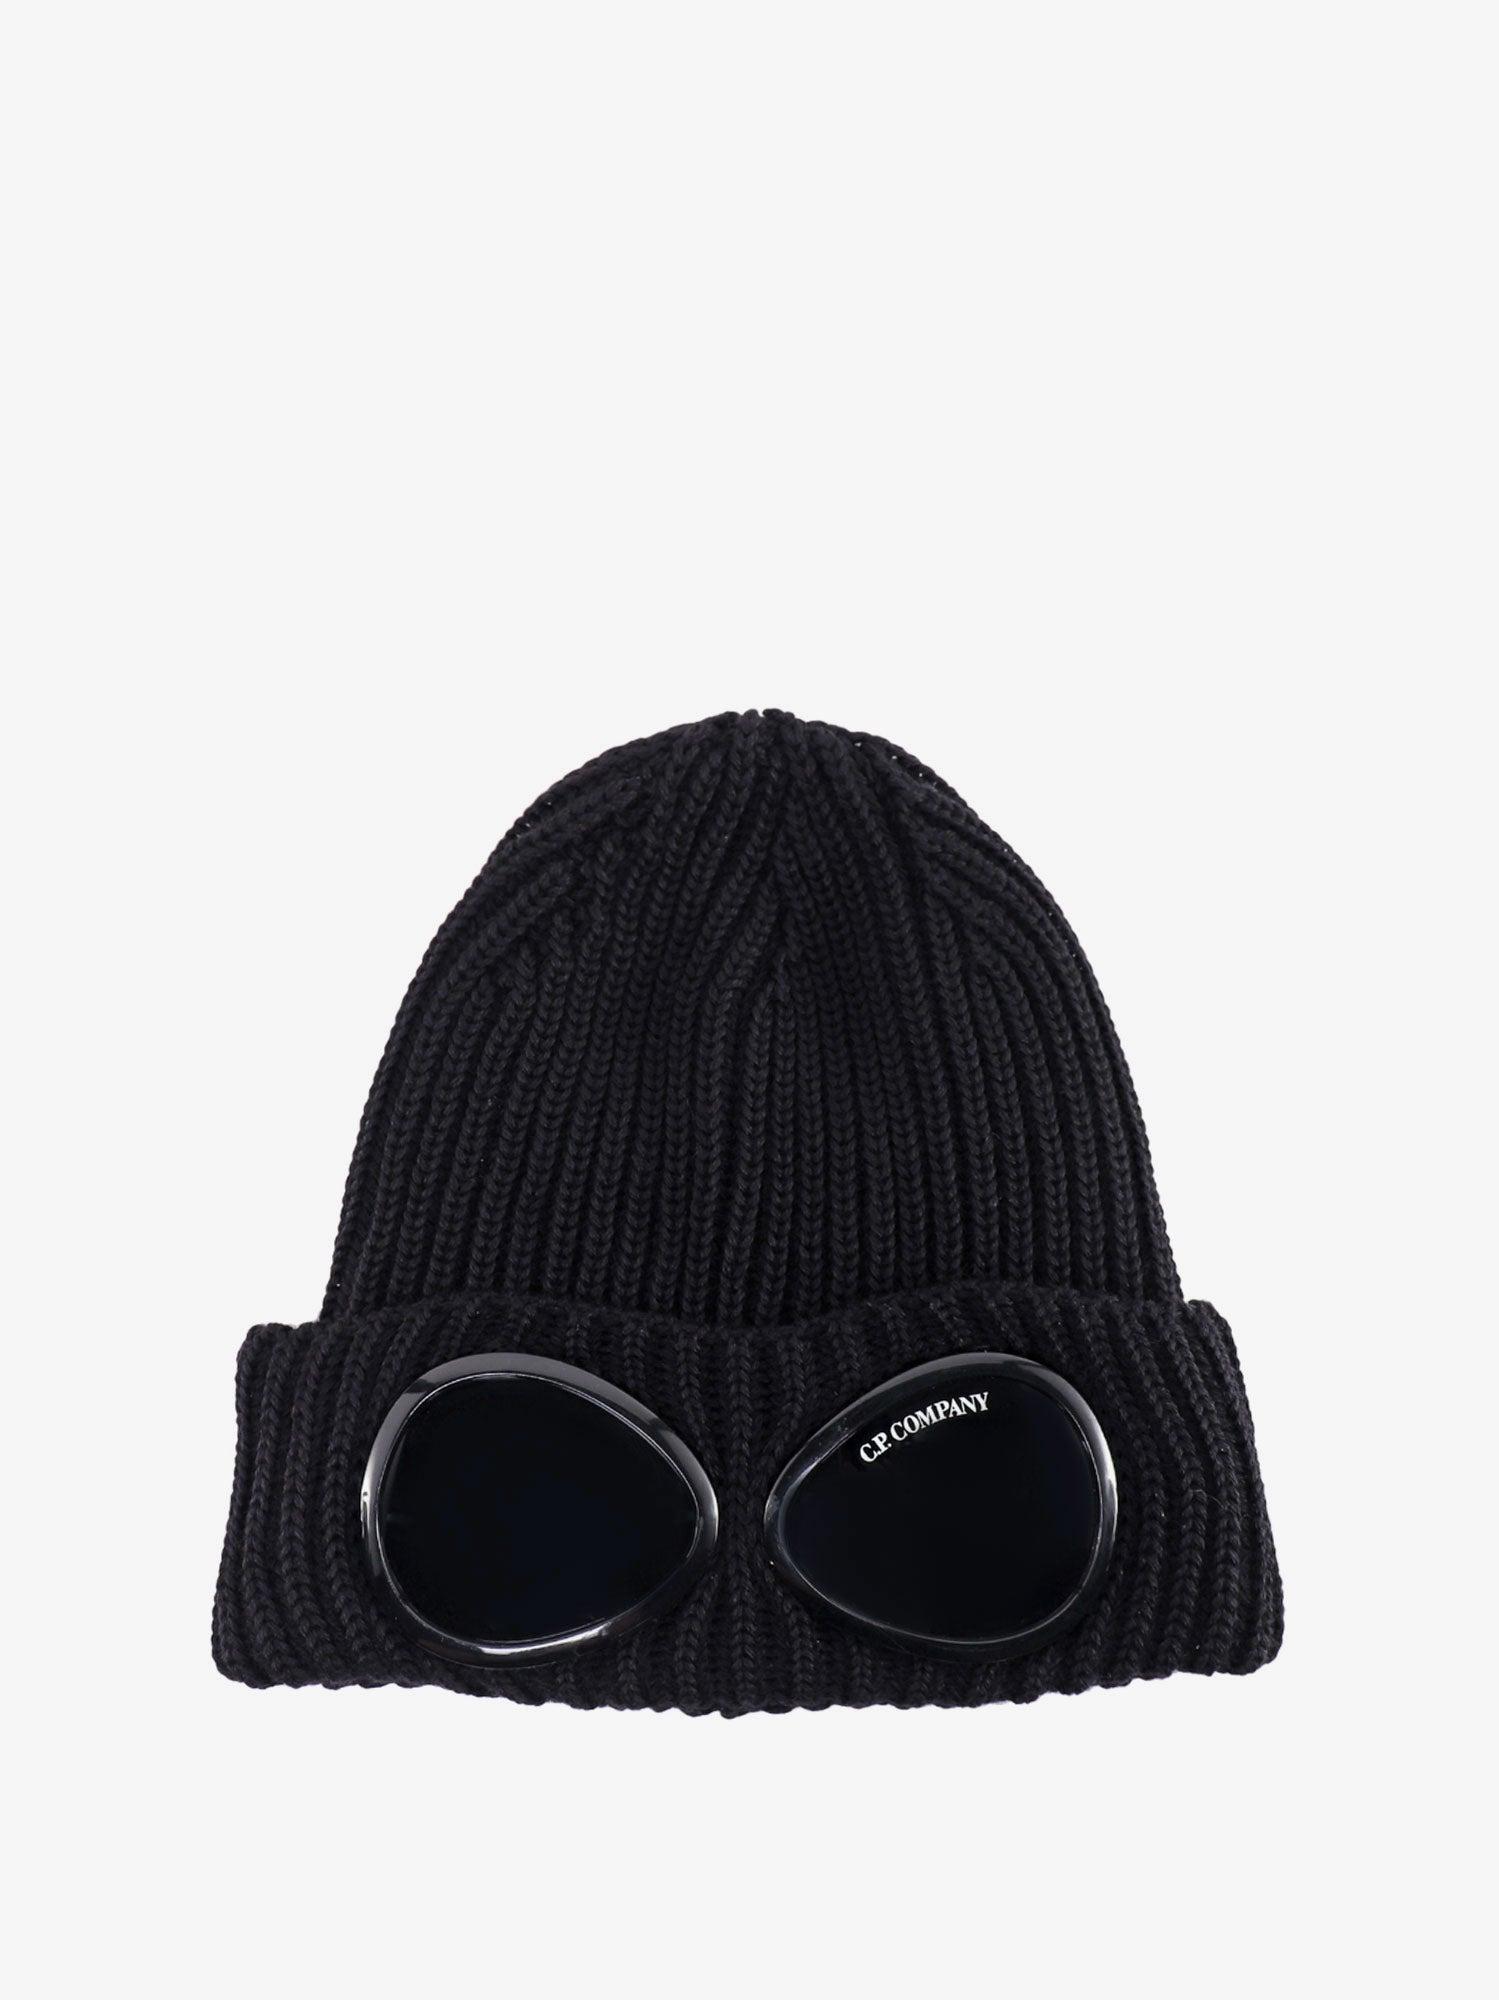 C.P. Company Wool Goggle-detail Turn-up Brim Beanie for Men - Save 35% |  Lyst